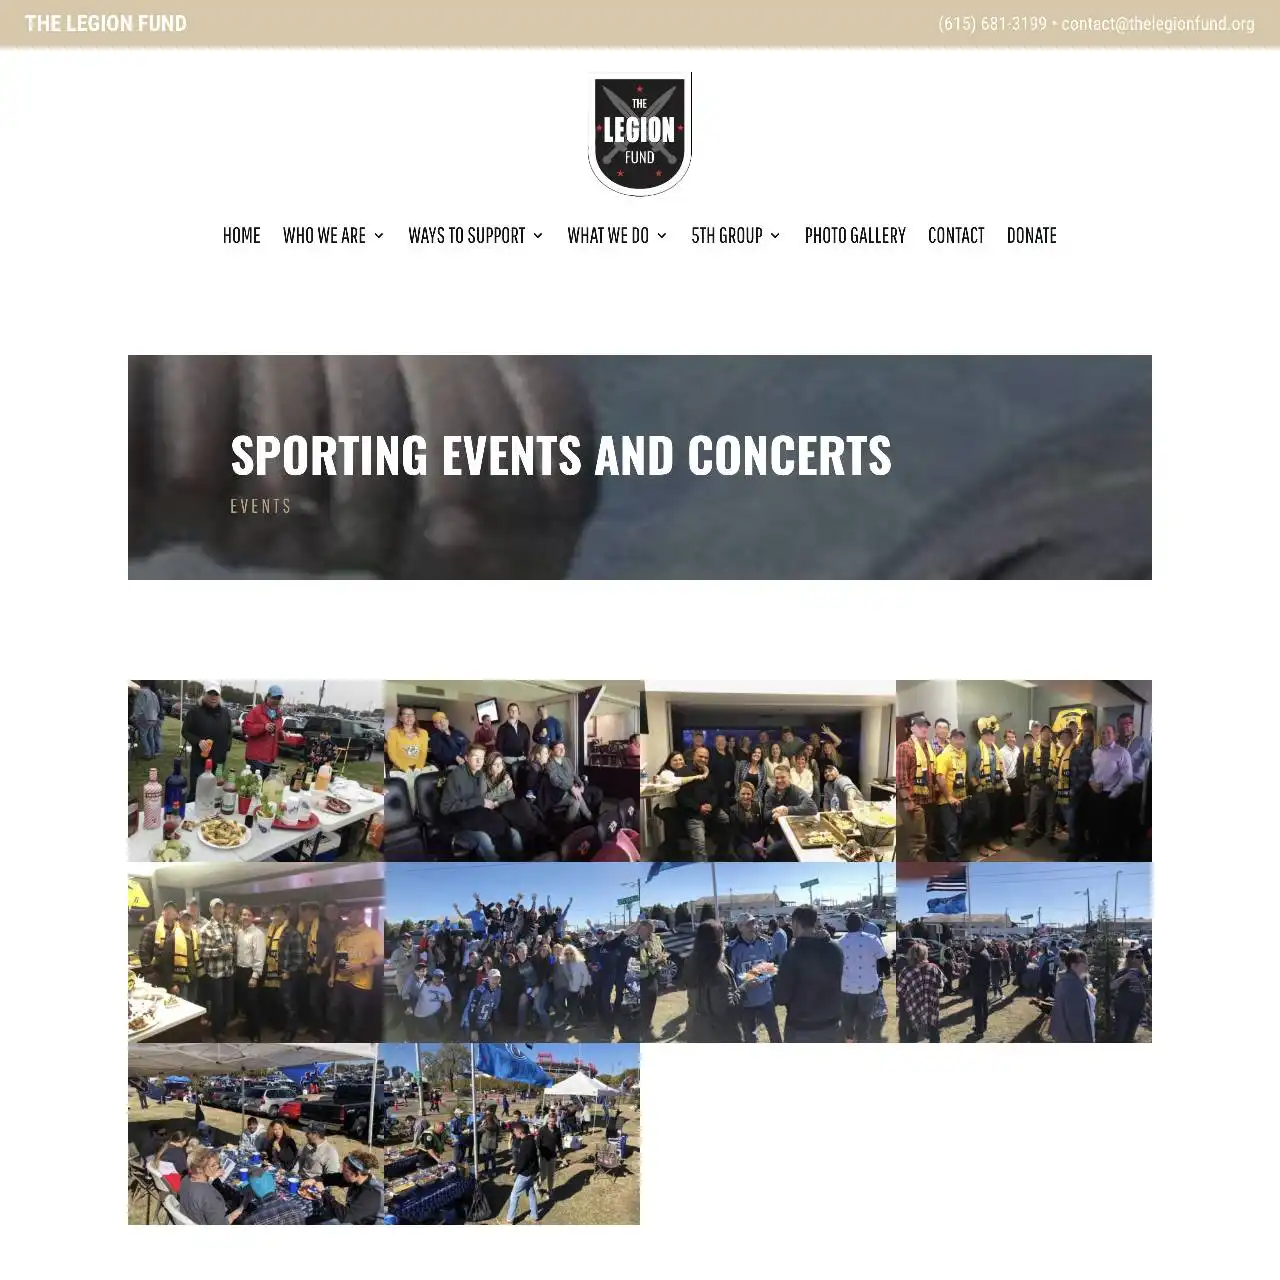 https thelegionfund.org events sporting events and concerts